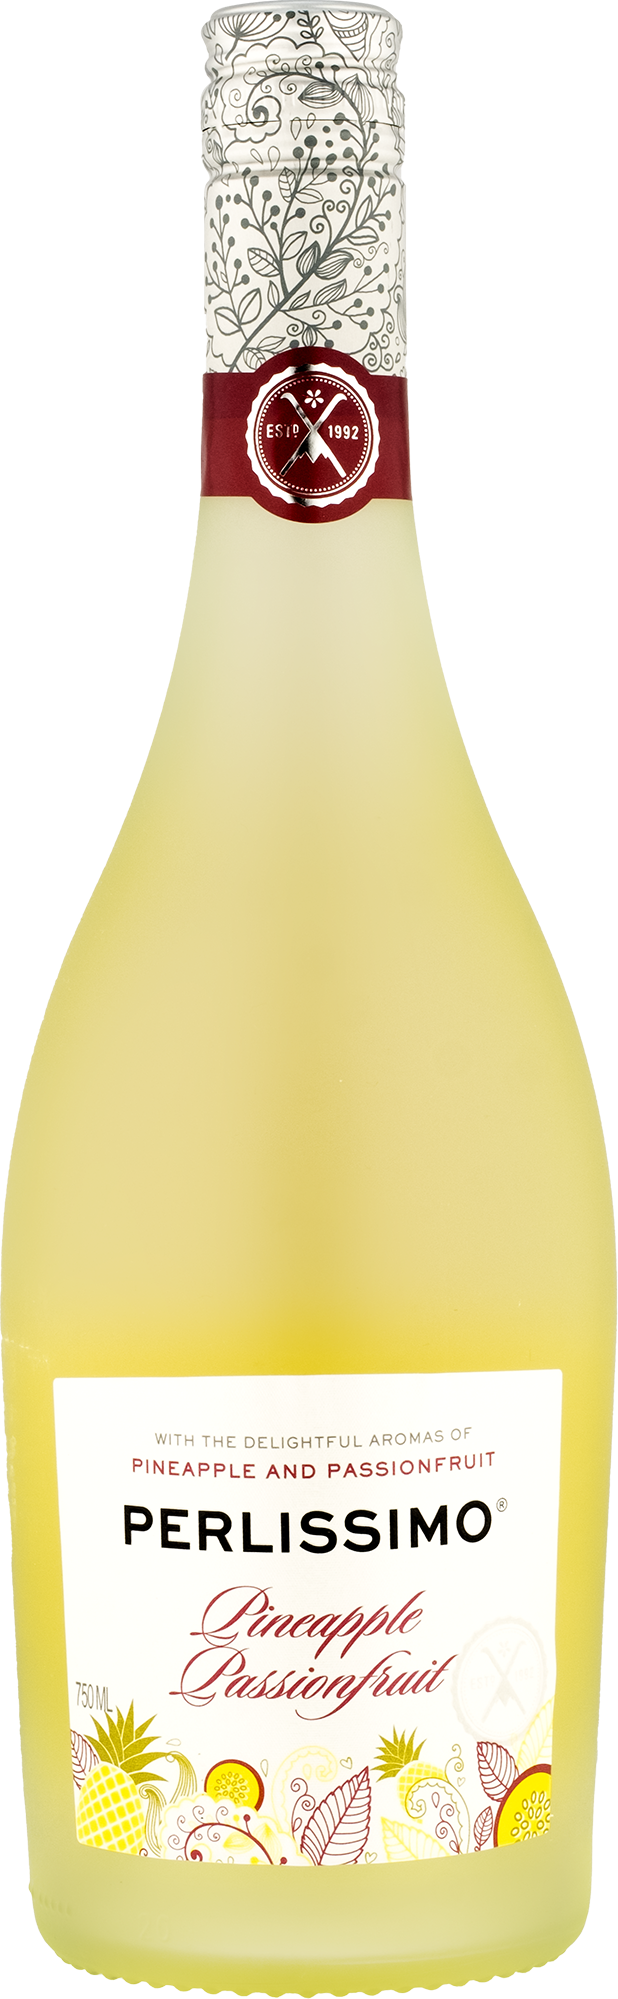 Perlissimo Pineapple and Passionfruit 5,5 % Sparkling Cocktail